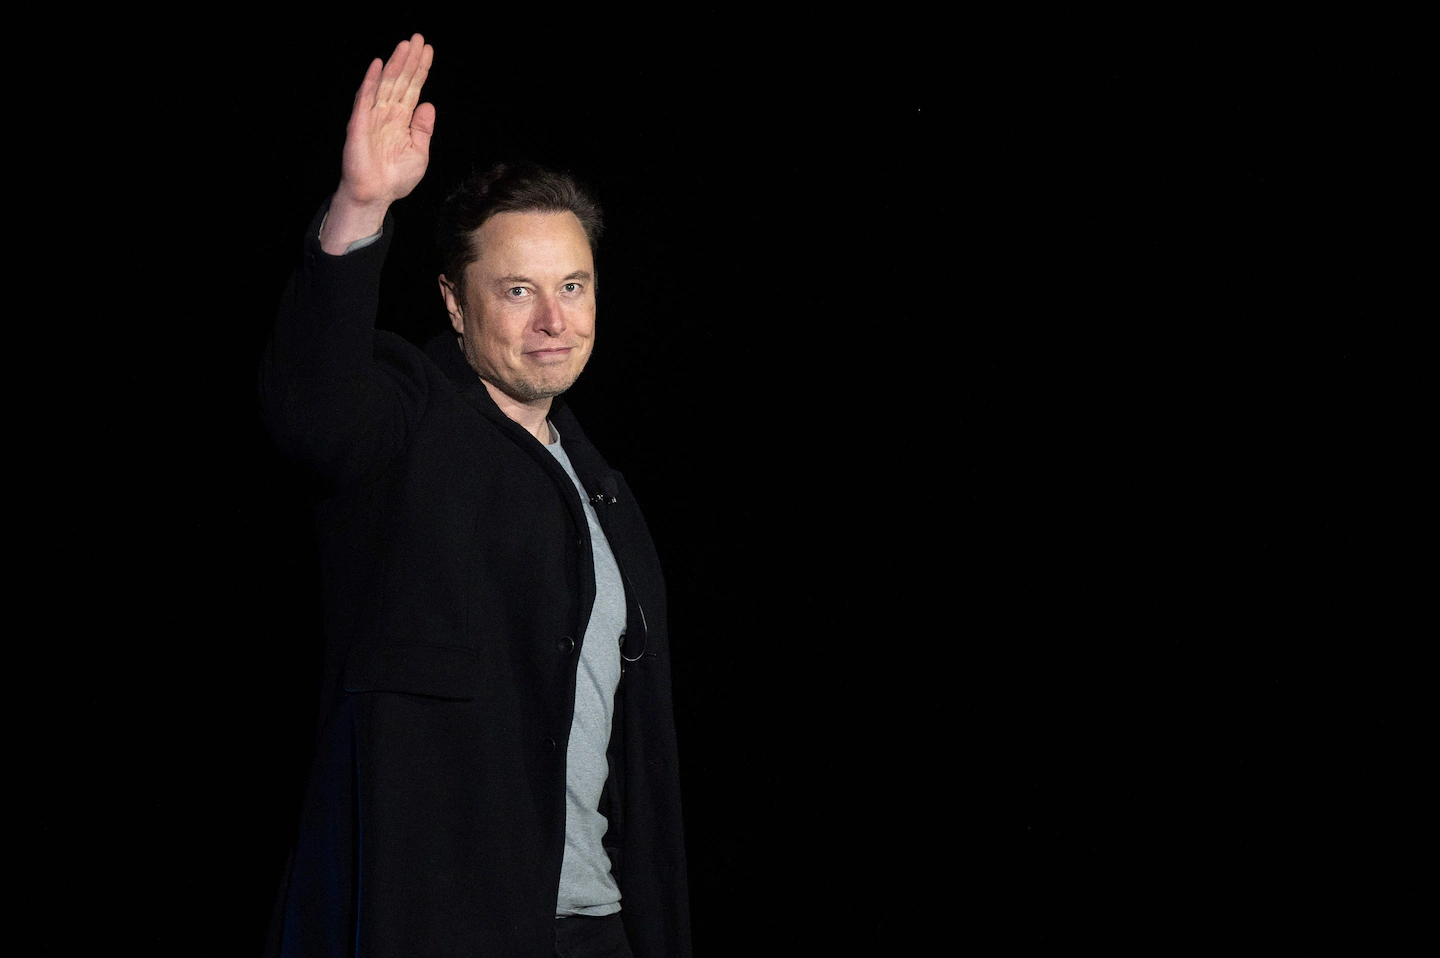 SEC confirms it is investigating Elon Musk over Twitter share purchases